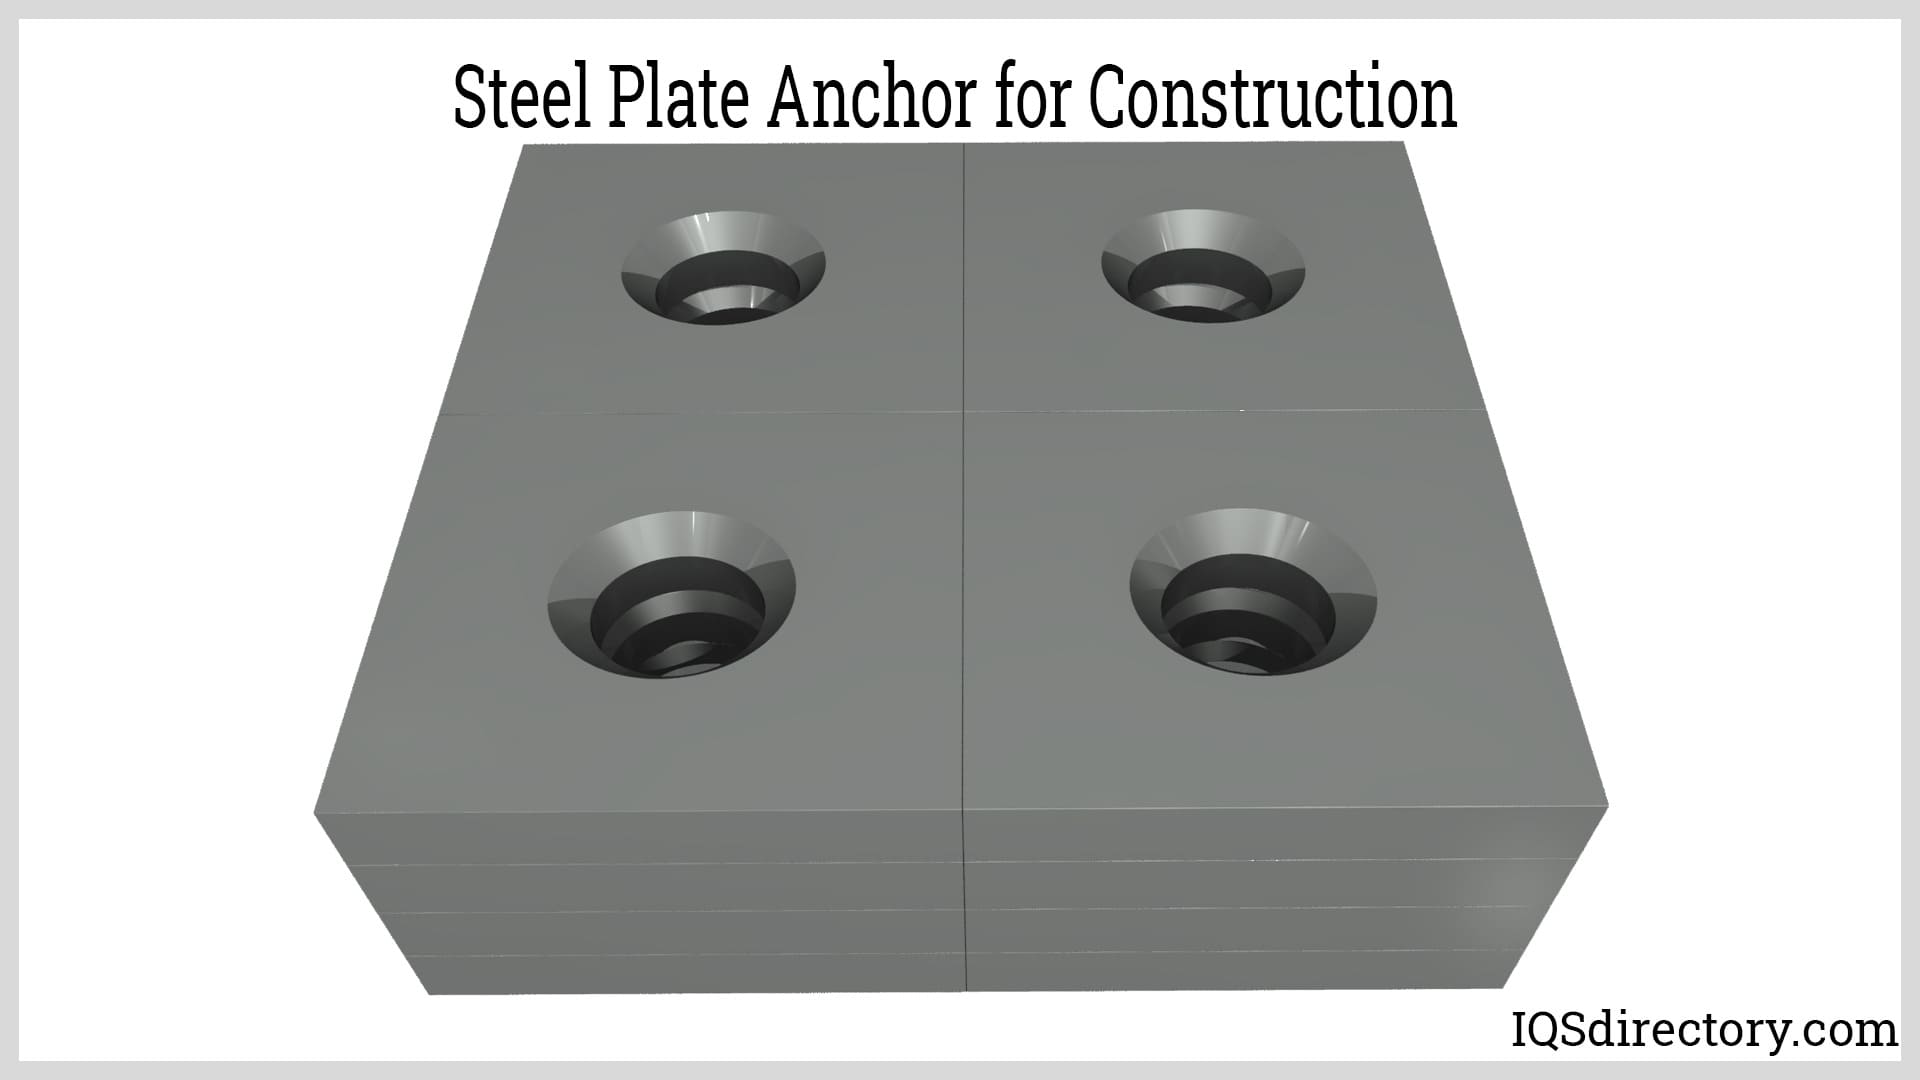 Steel Plate Anchor for Construction